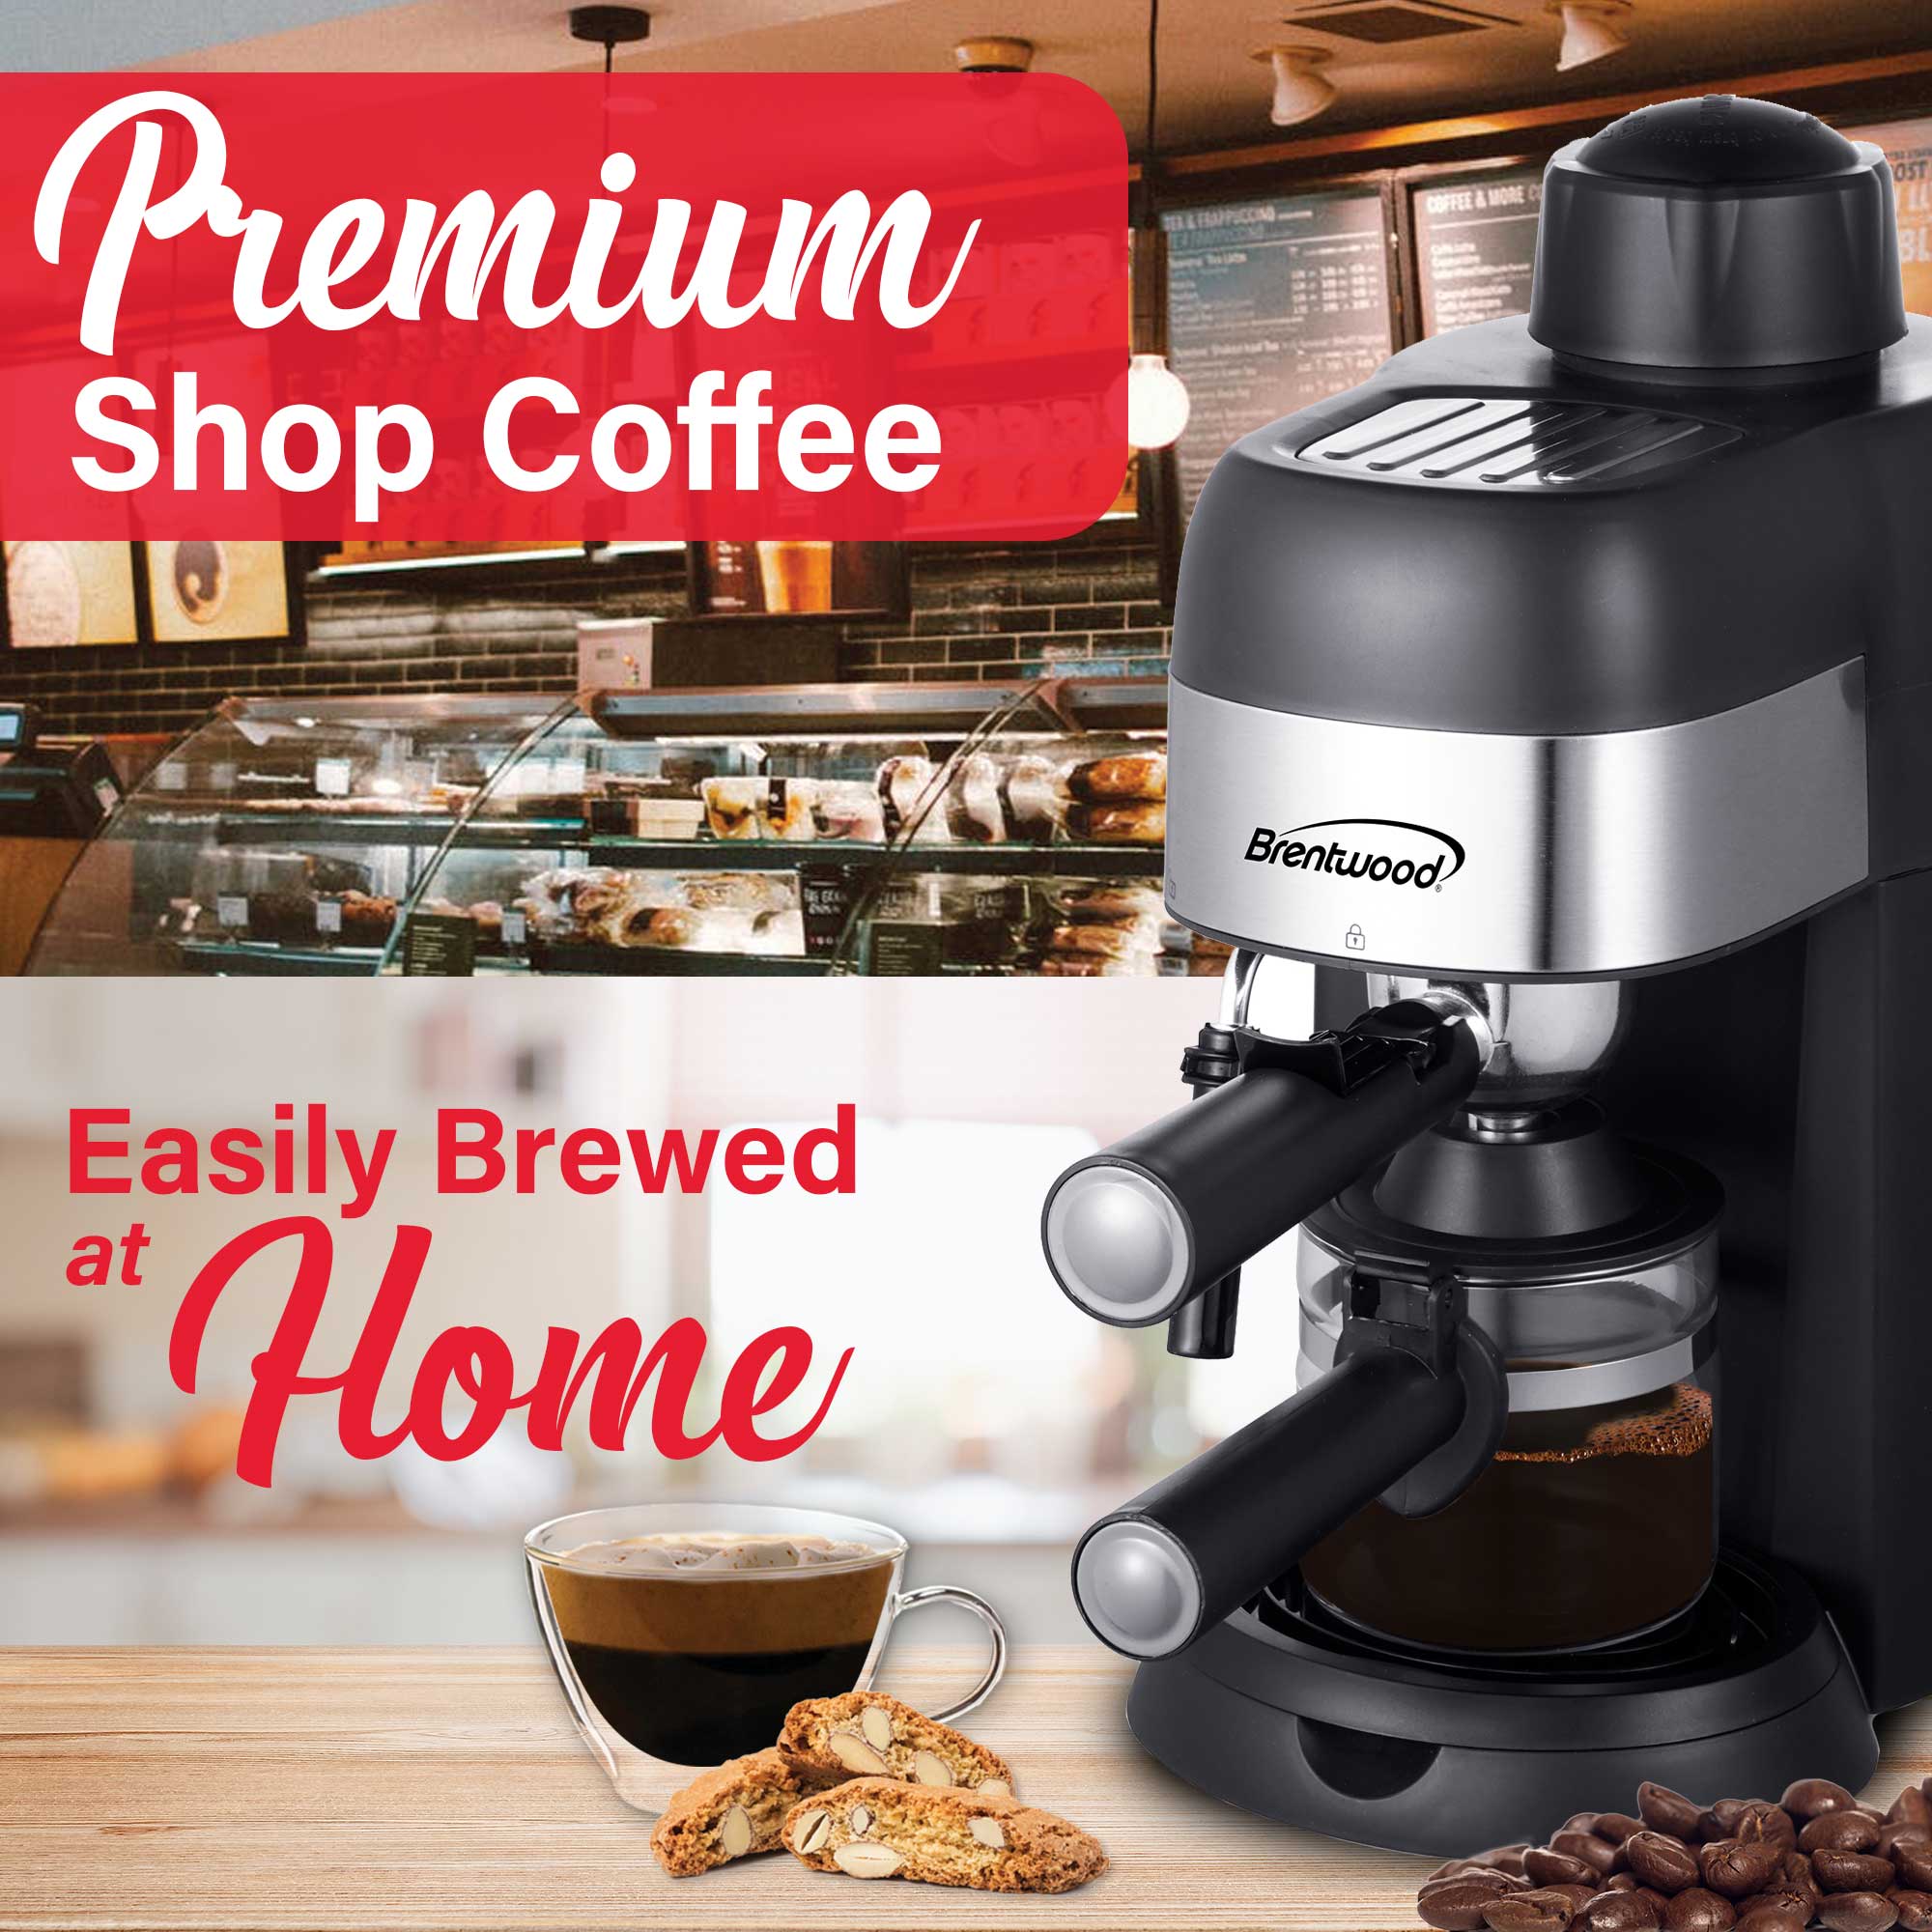 Brentwood GA-134BK Espresso and Cappuccino Maker, Black - Brentwood  Appliances